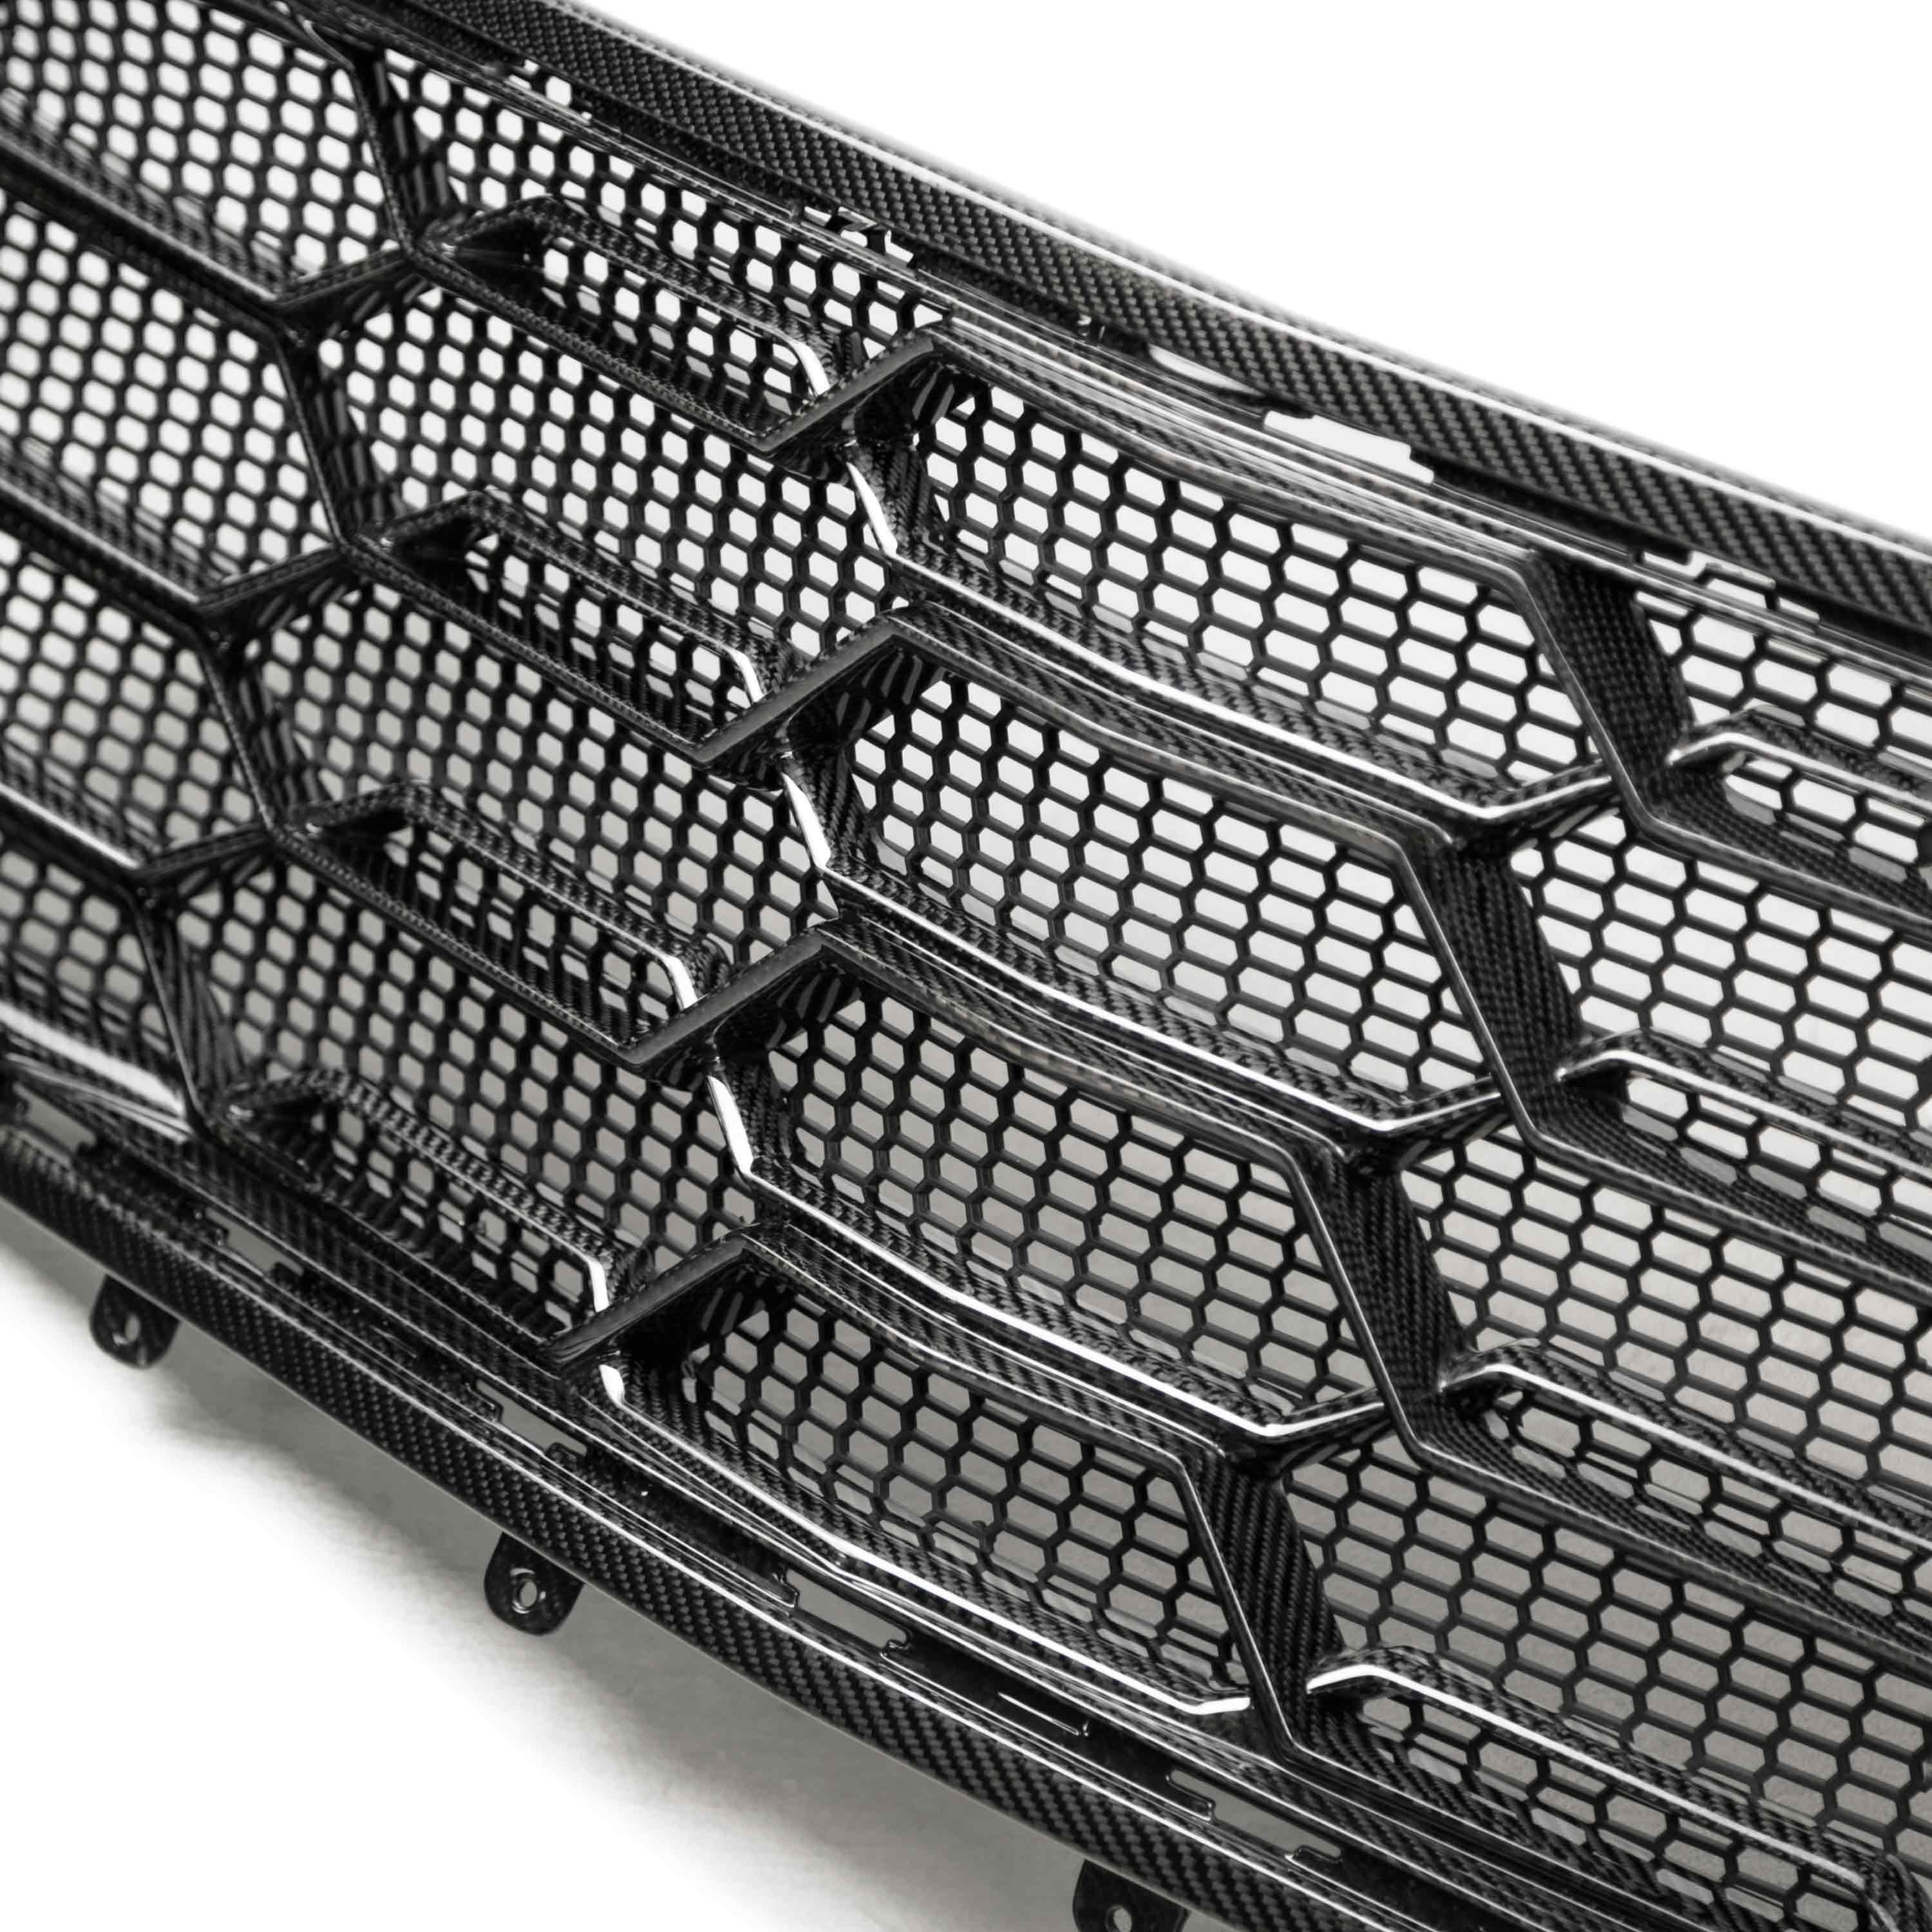 2010-2015 Chevy Camaro ZL1 1LE Track Package Carbon Fiber Lower Grille Aftermarket AAUSA ZL1 Bumper Mold